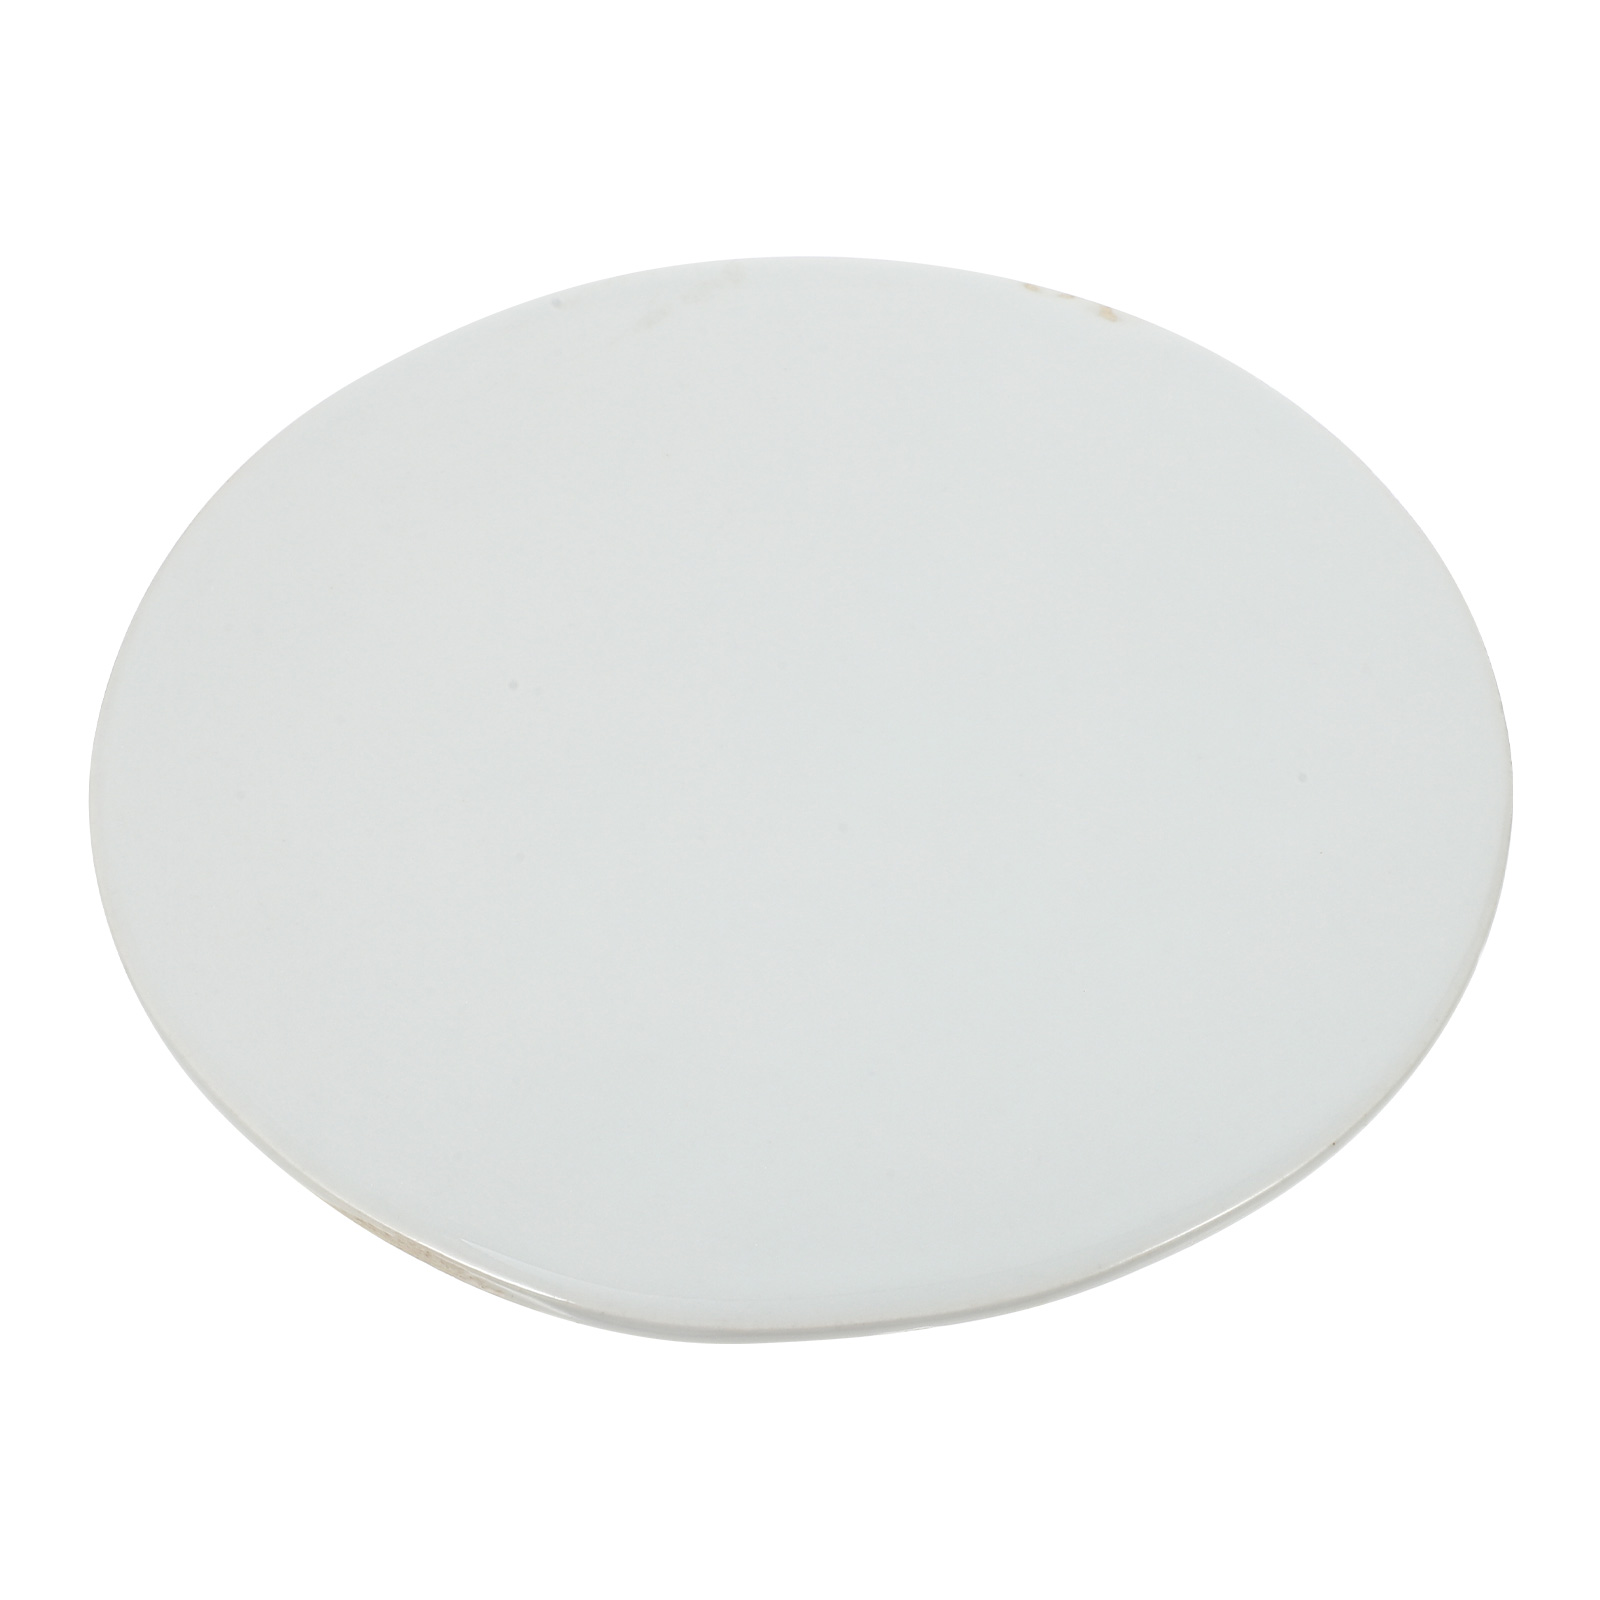 Ceramic Round Tiles Unfinished Plate Coasters Painting Porcelain Plates Blanks Dinner Blank Watercolor - image 4 of 8